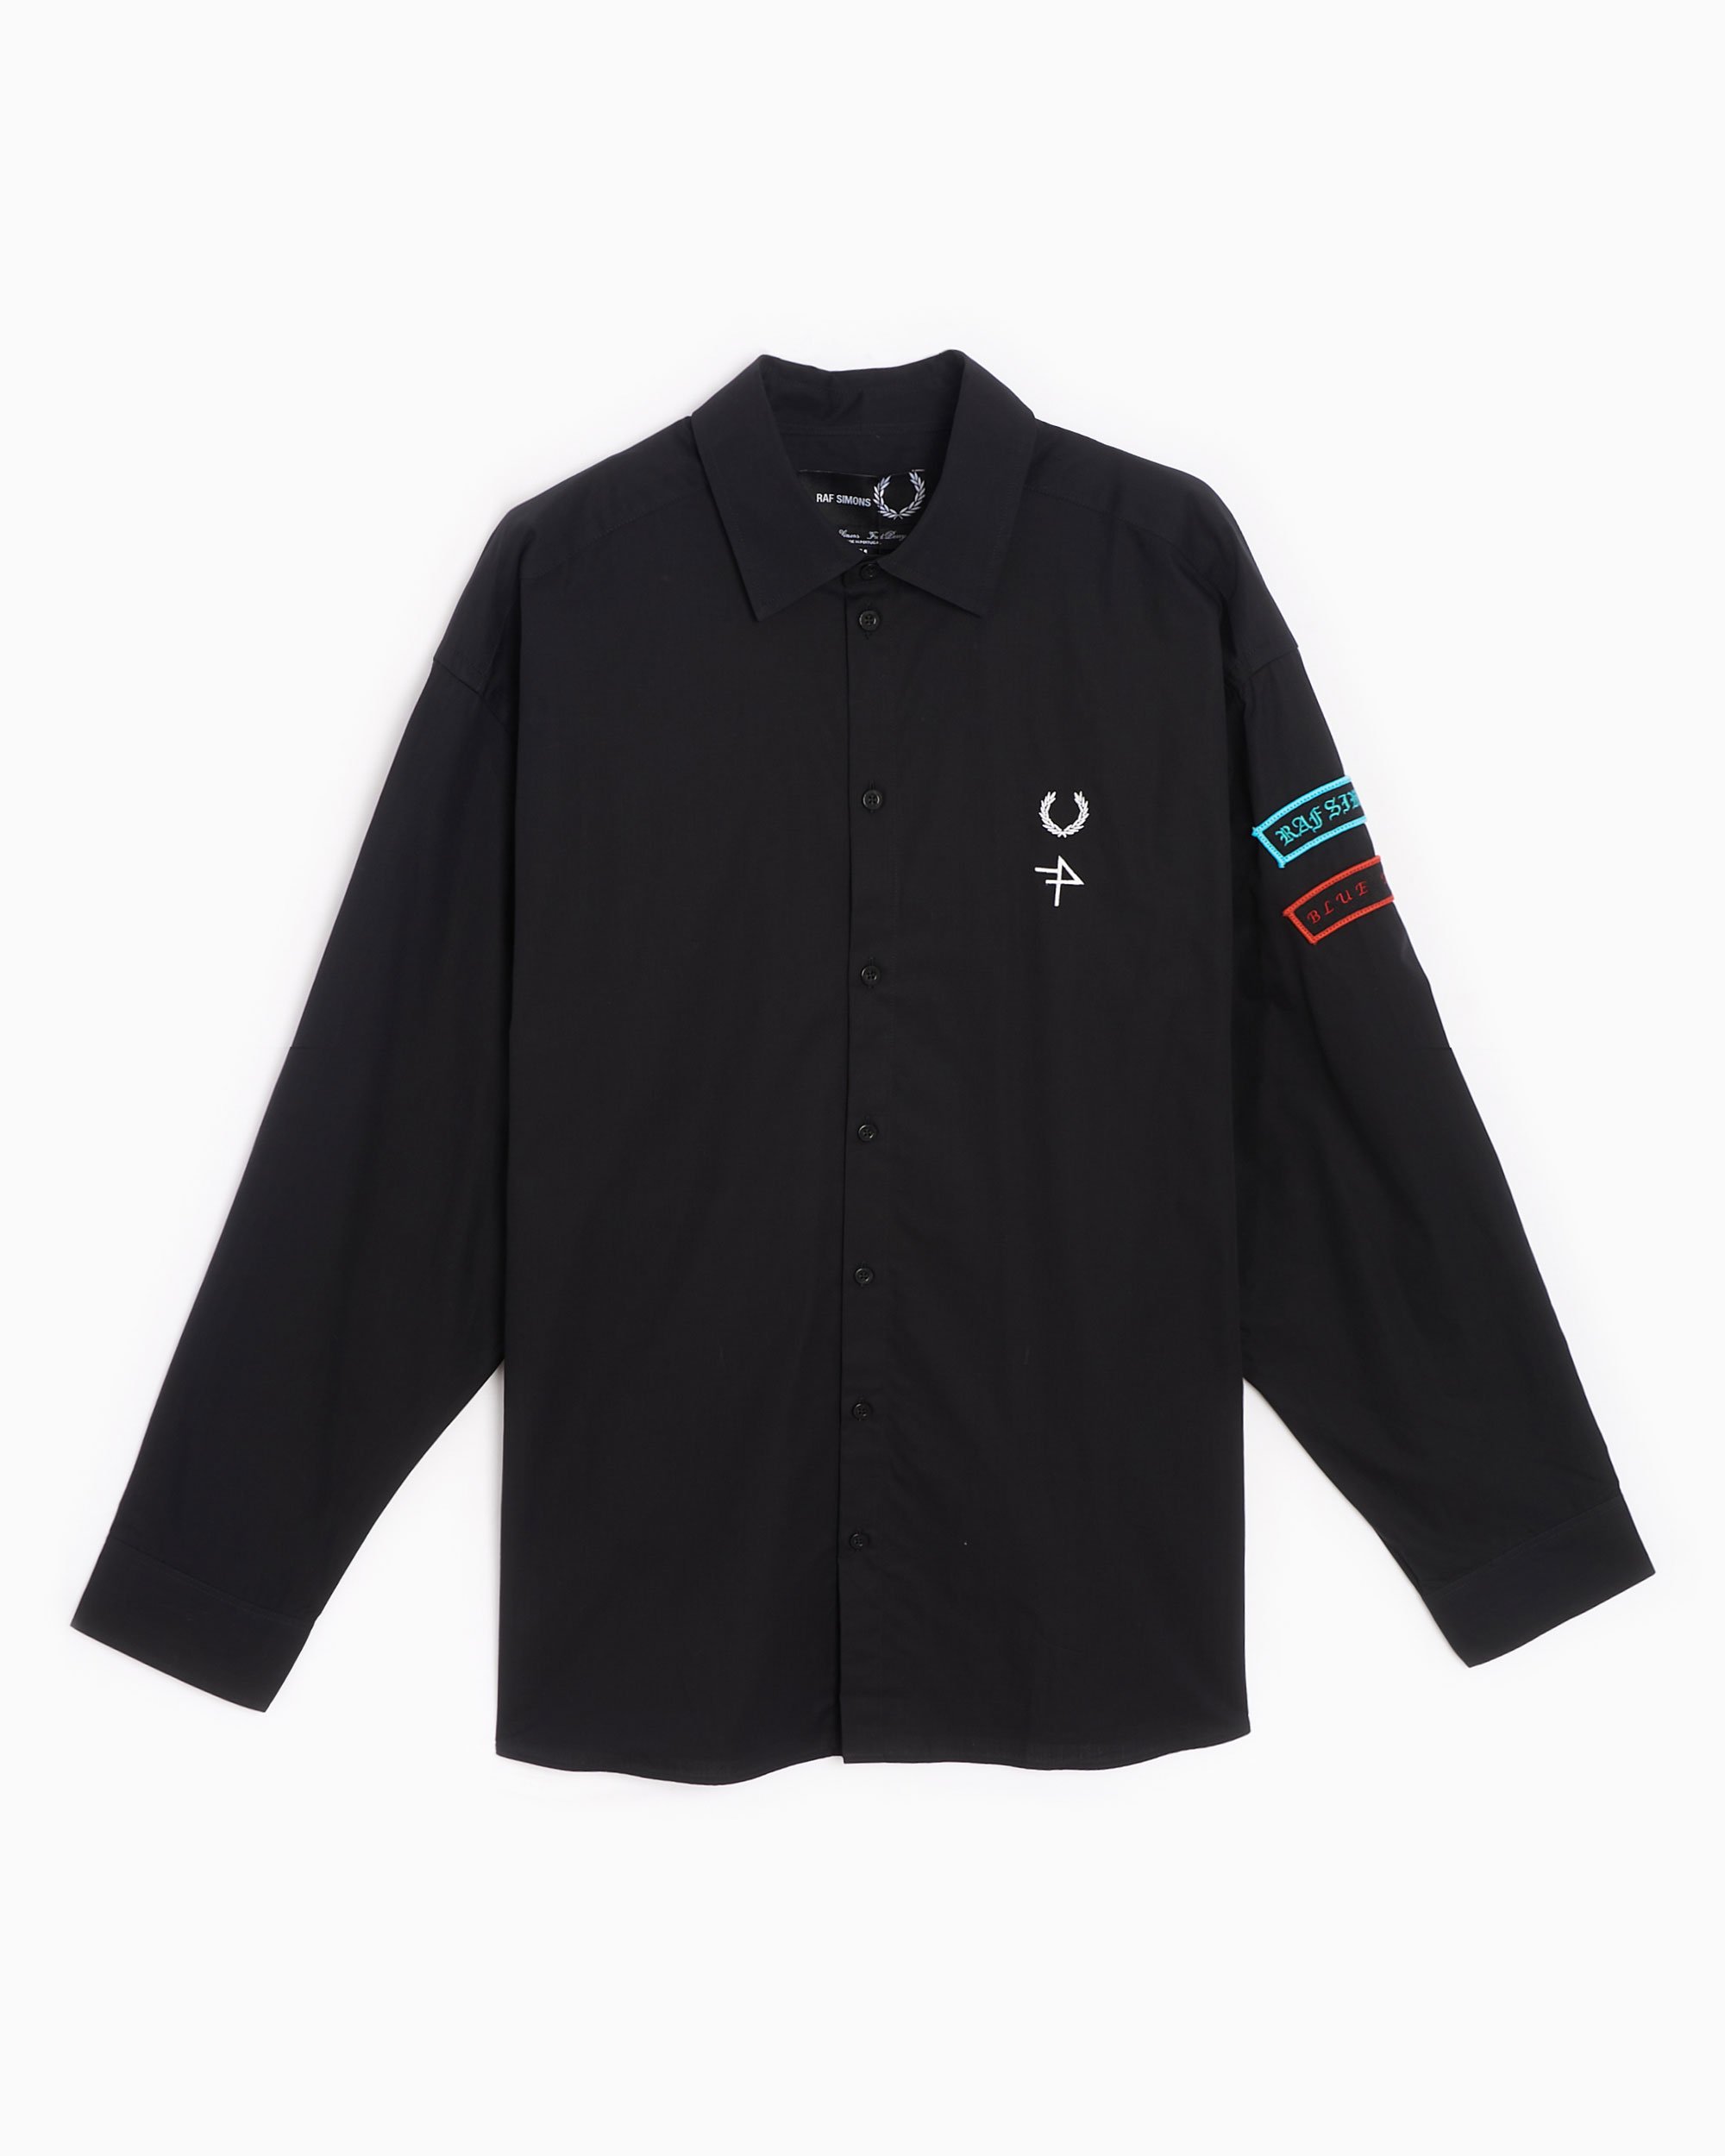 Fred Perry x Raf Simons Patched Men's Oversized Shirt